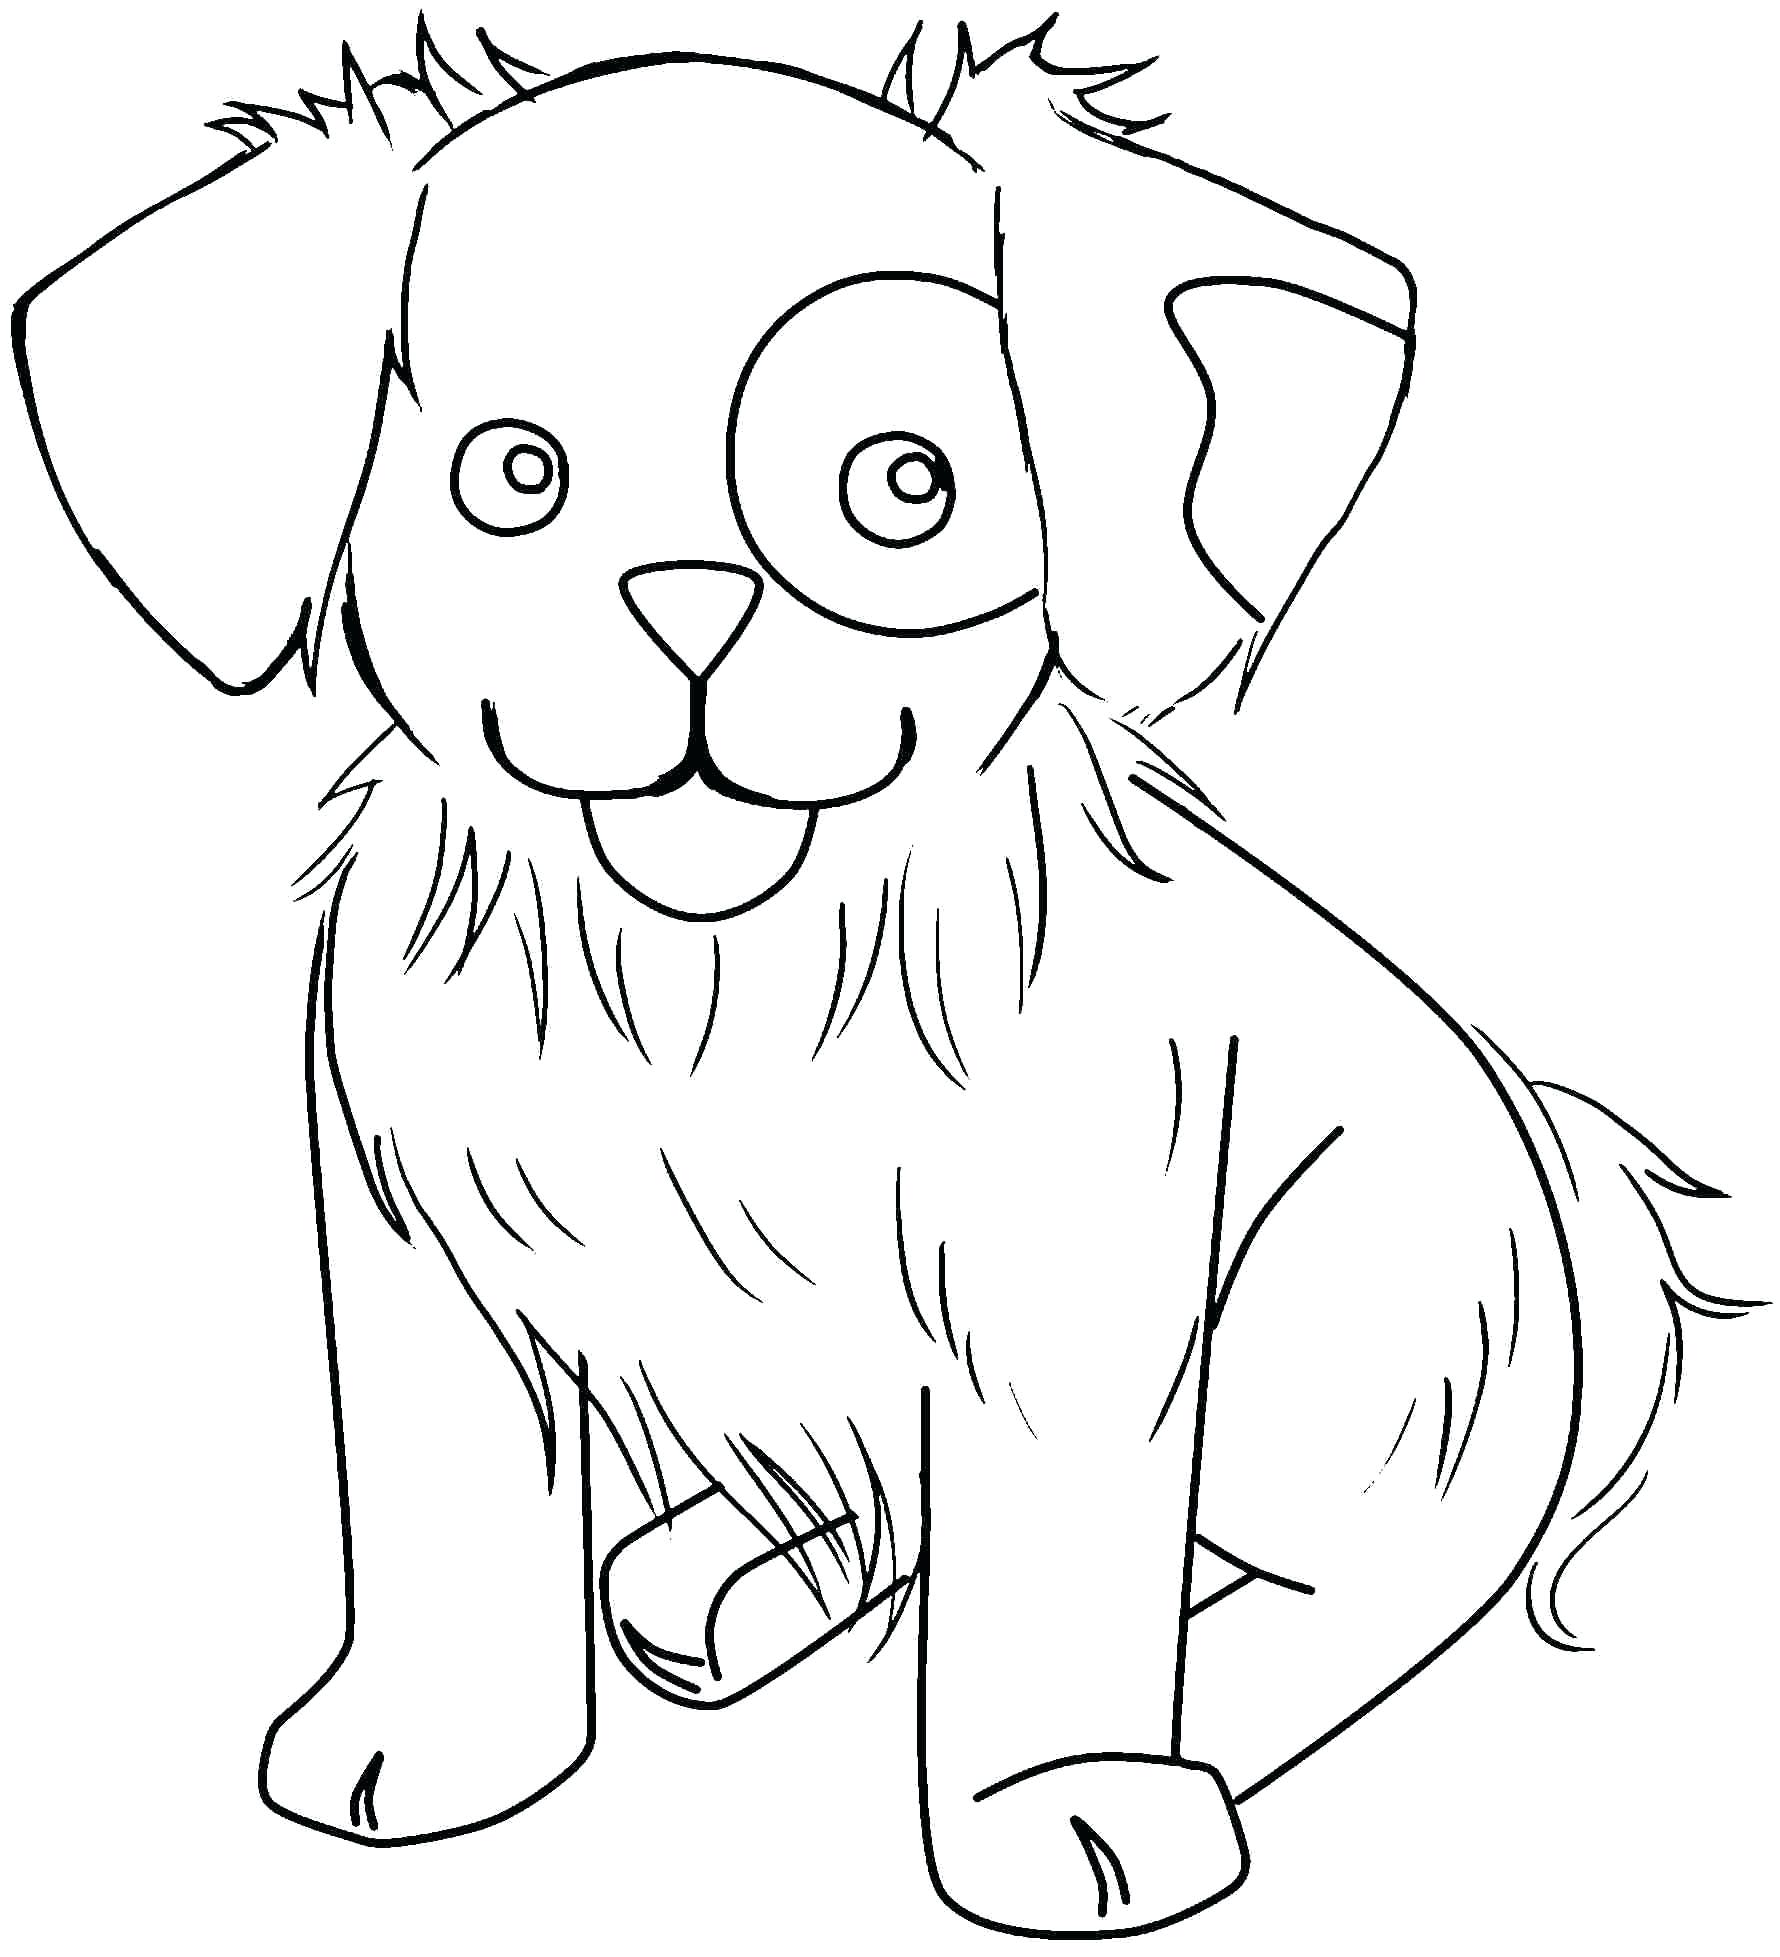 A Cute Dog Coloring Pages